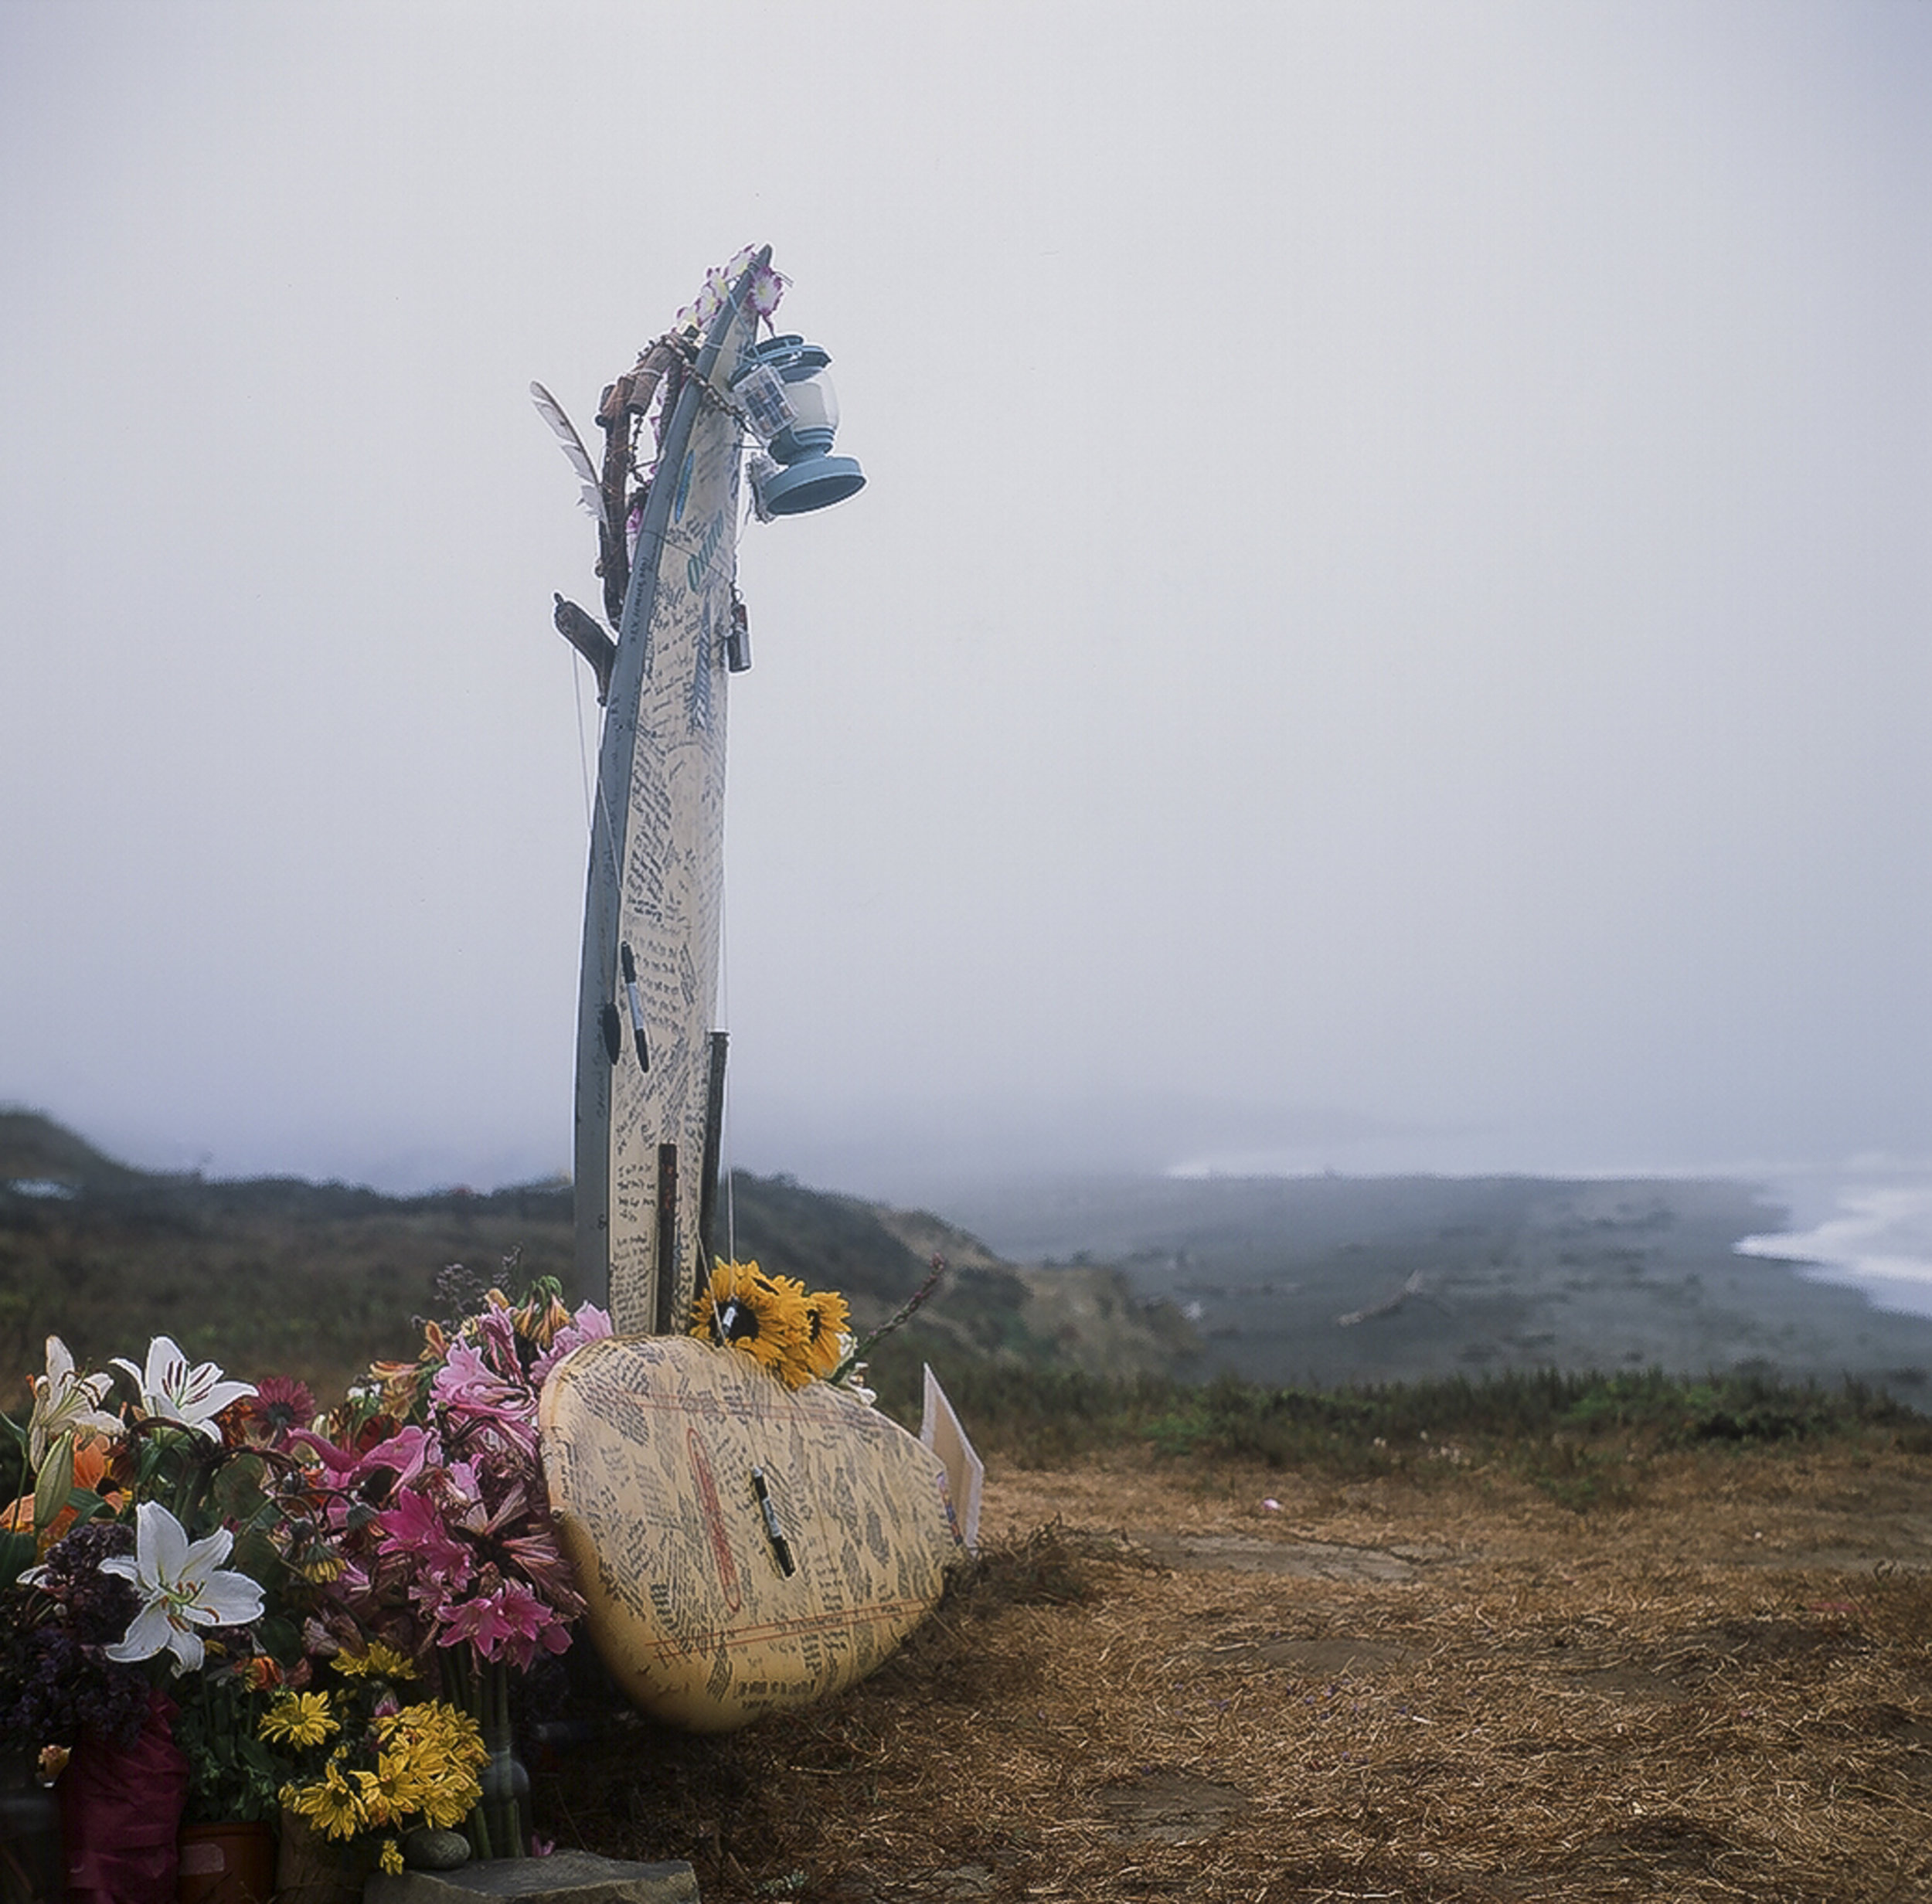 Goodbyes To A Fallen Surfer | Yashica Mat 124G | Fuji Provia 100F expired 2004 @ ISO 64 | James Thorpe